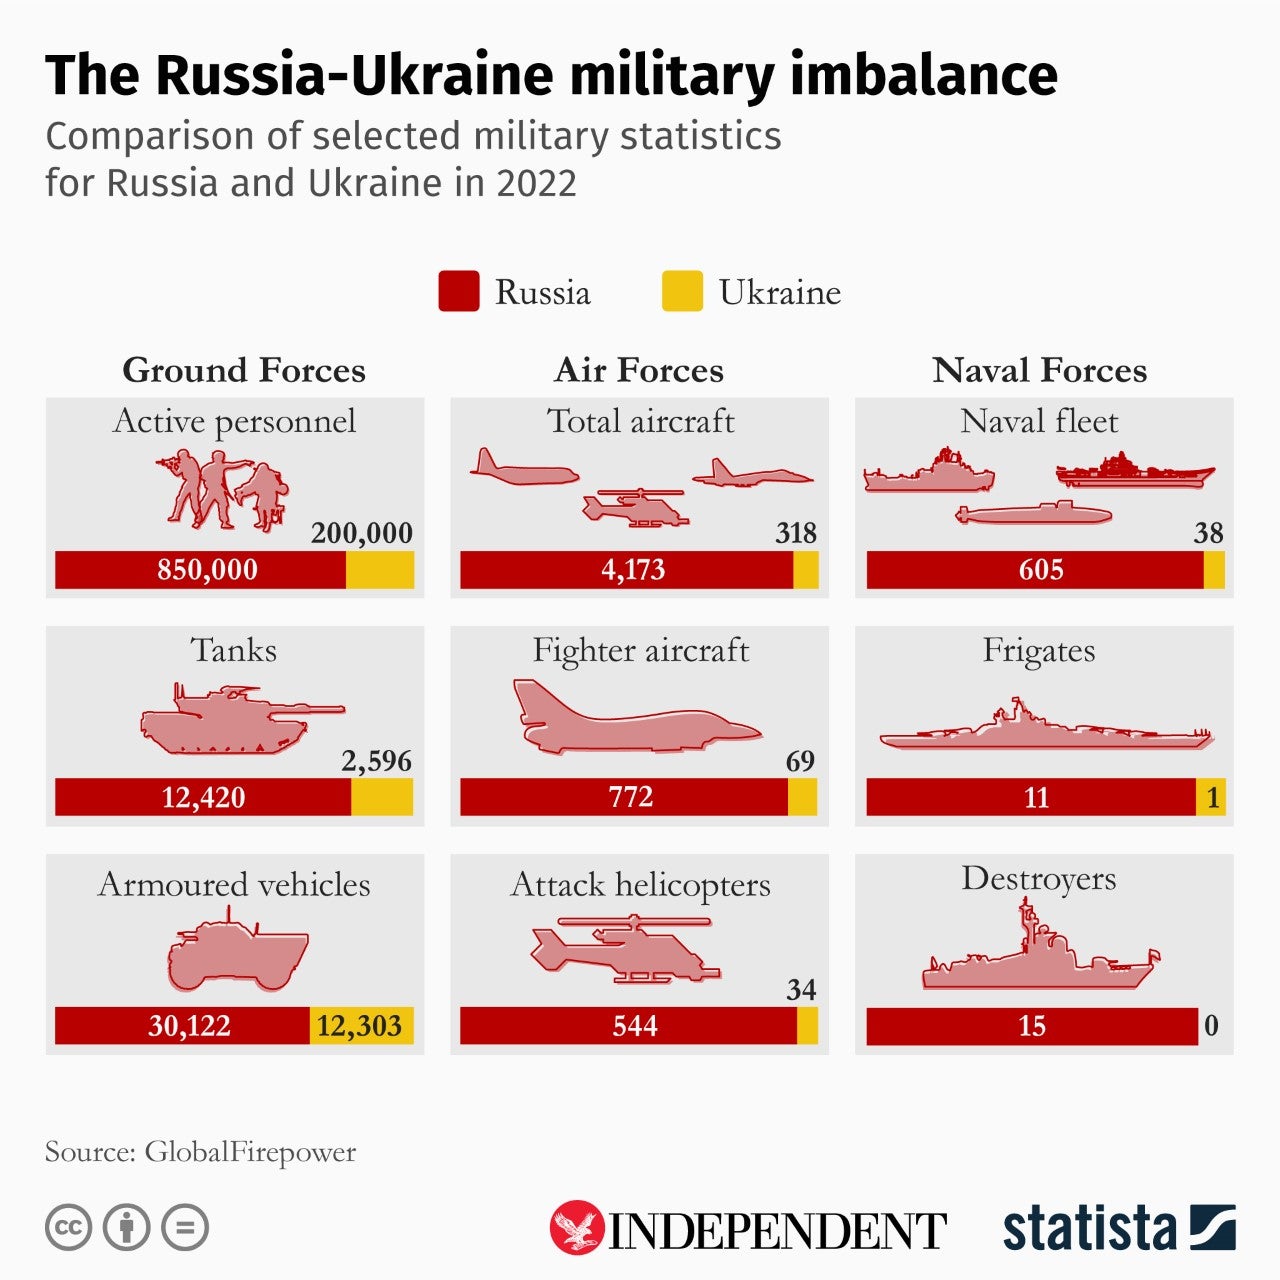 This infographic, created for The Independent by statistics agency Statista, shows the relative military strength of Ukraine and Russia